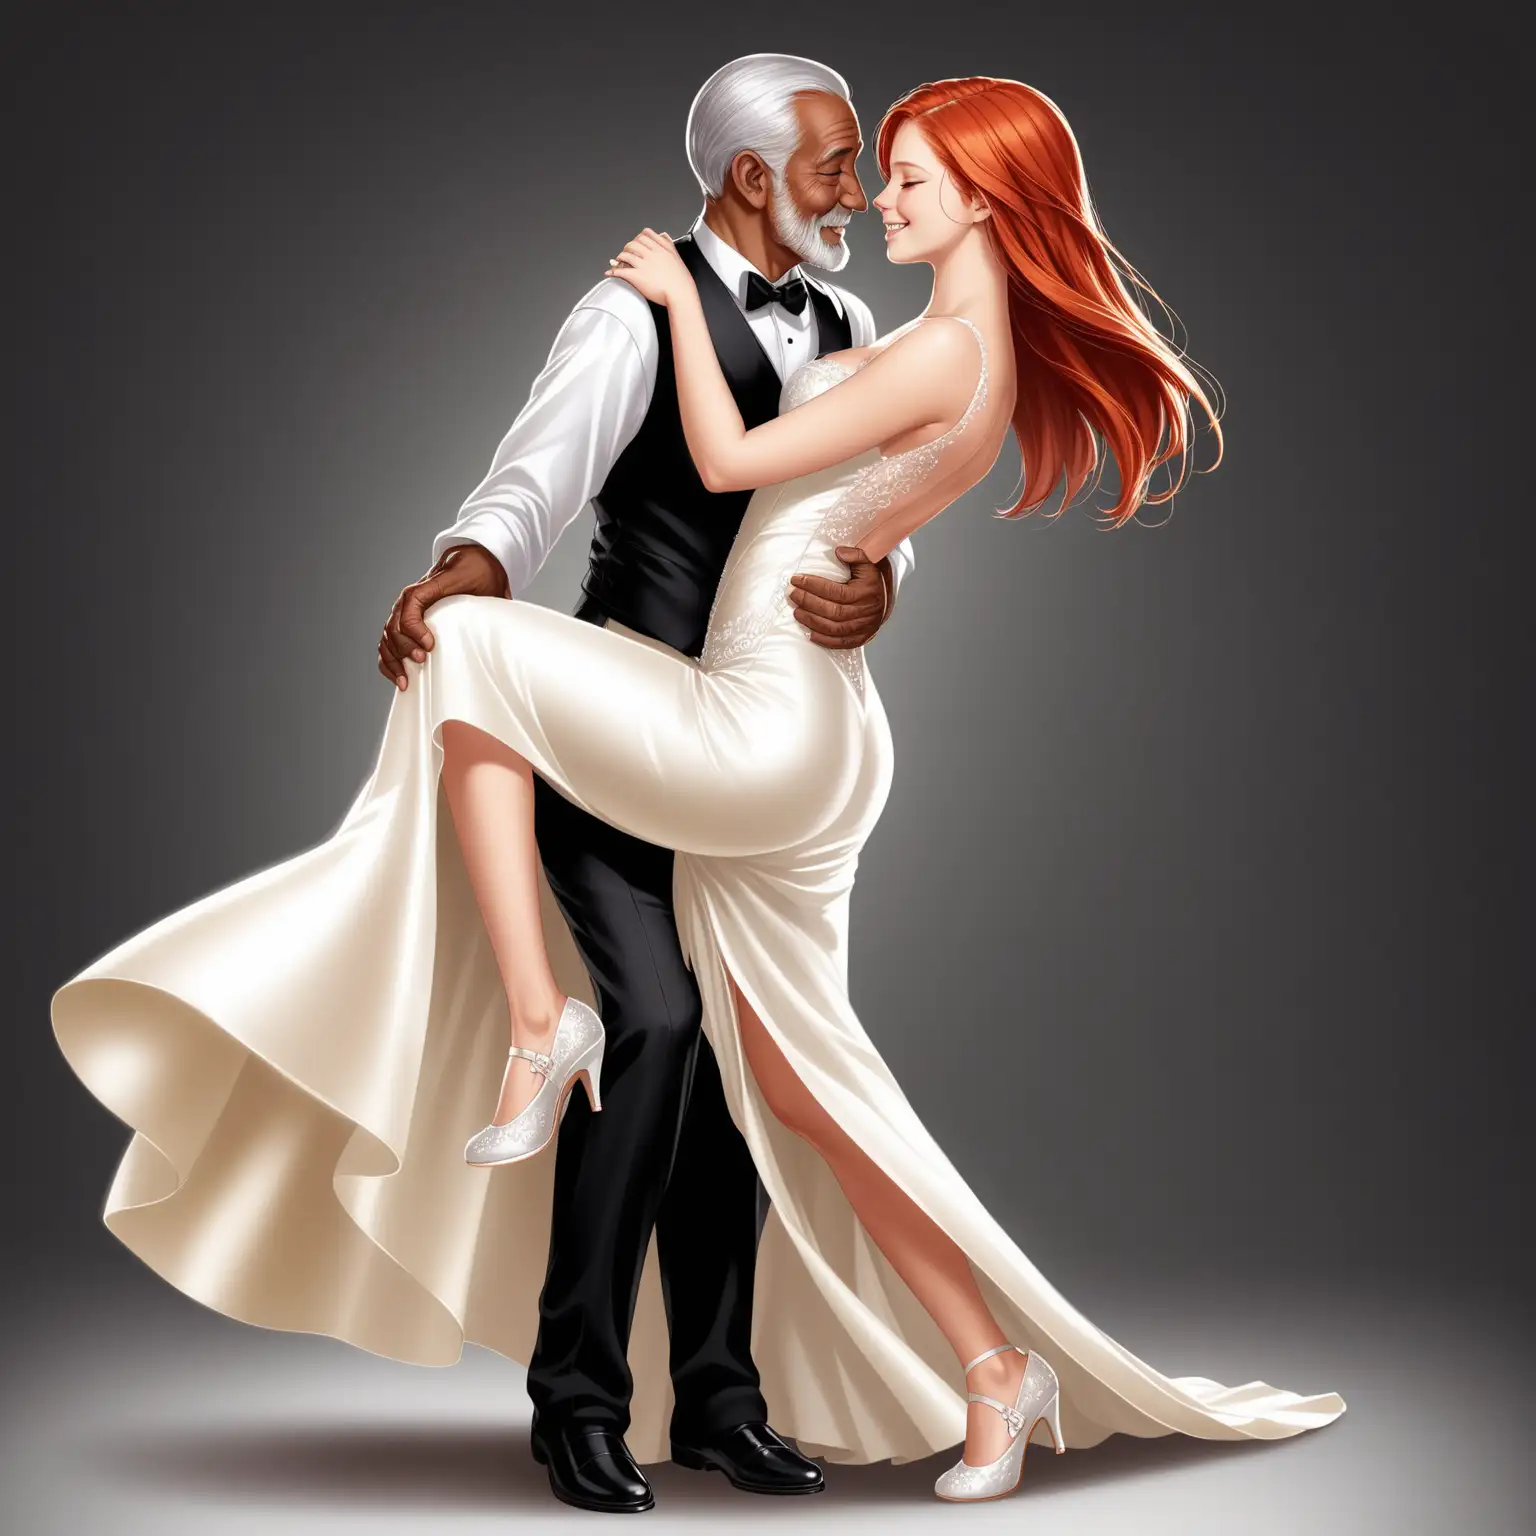 Passionate Dance of Love Ginny Weasley and Husband in Ivory Wedding Attire